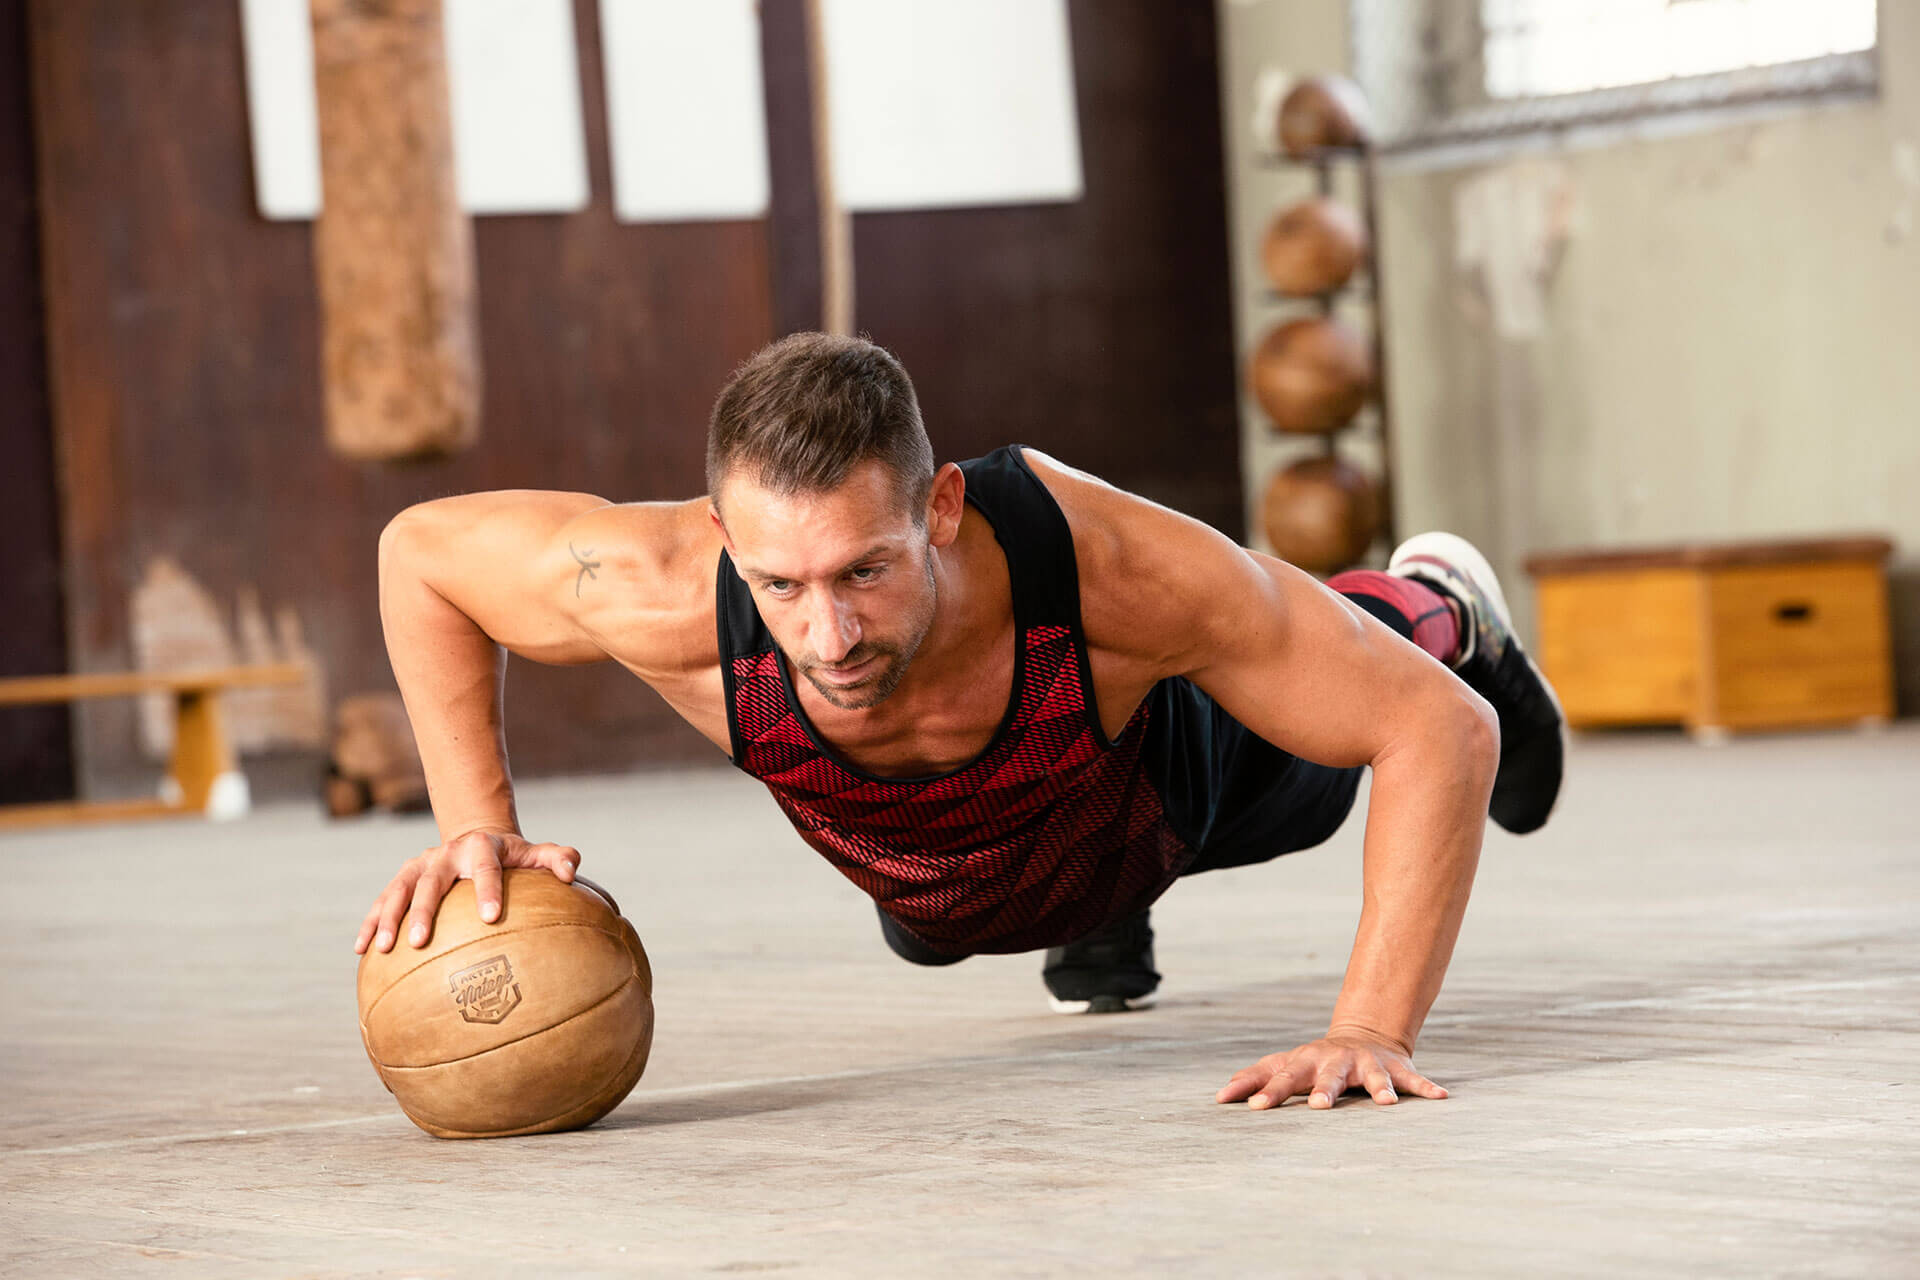 Load video: Personal trainer Arne Derricks shows a 7 minute workout with the ARTZT Vintage Series medicine ball.